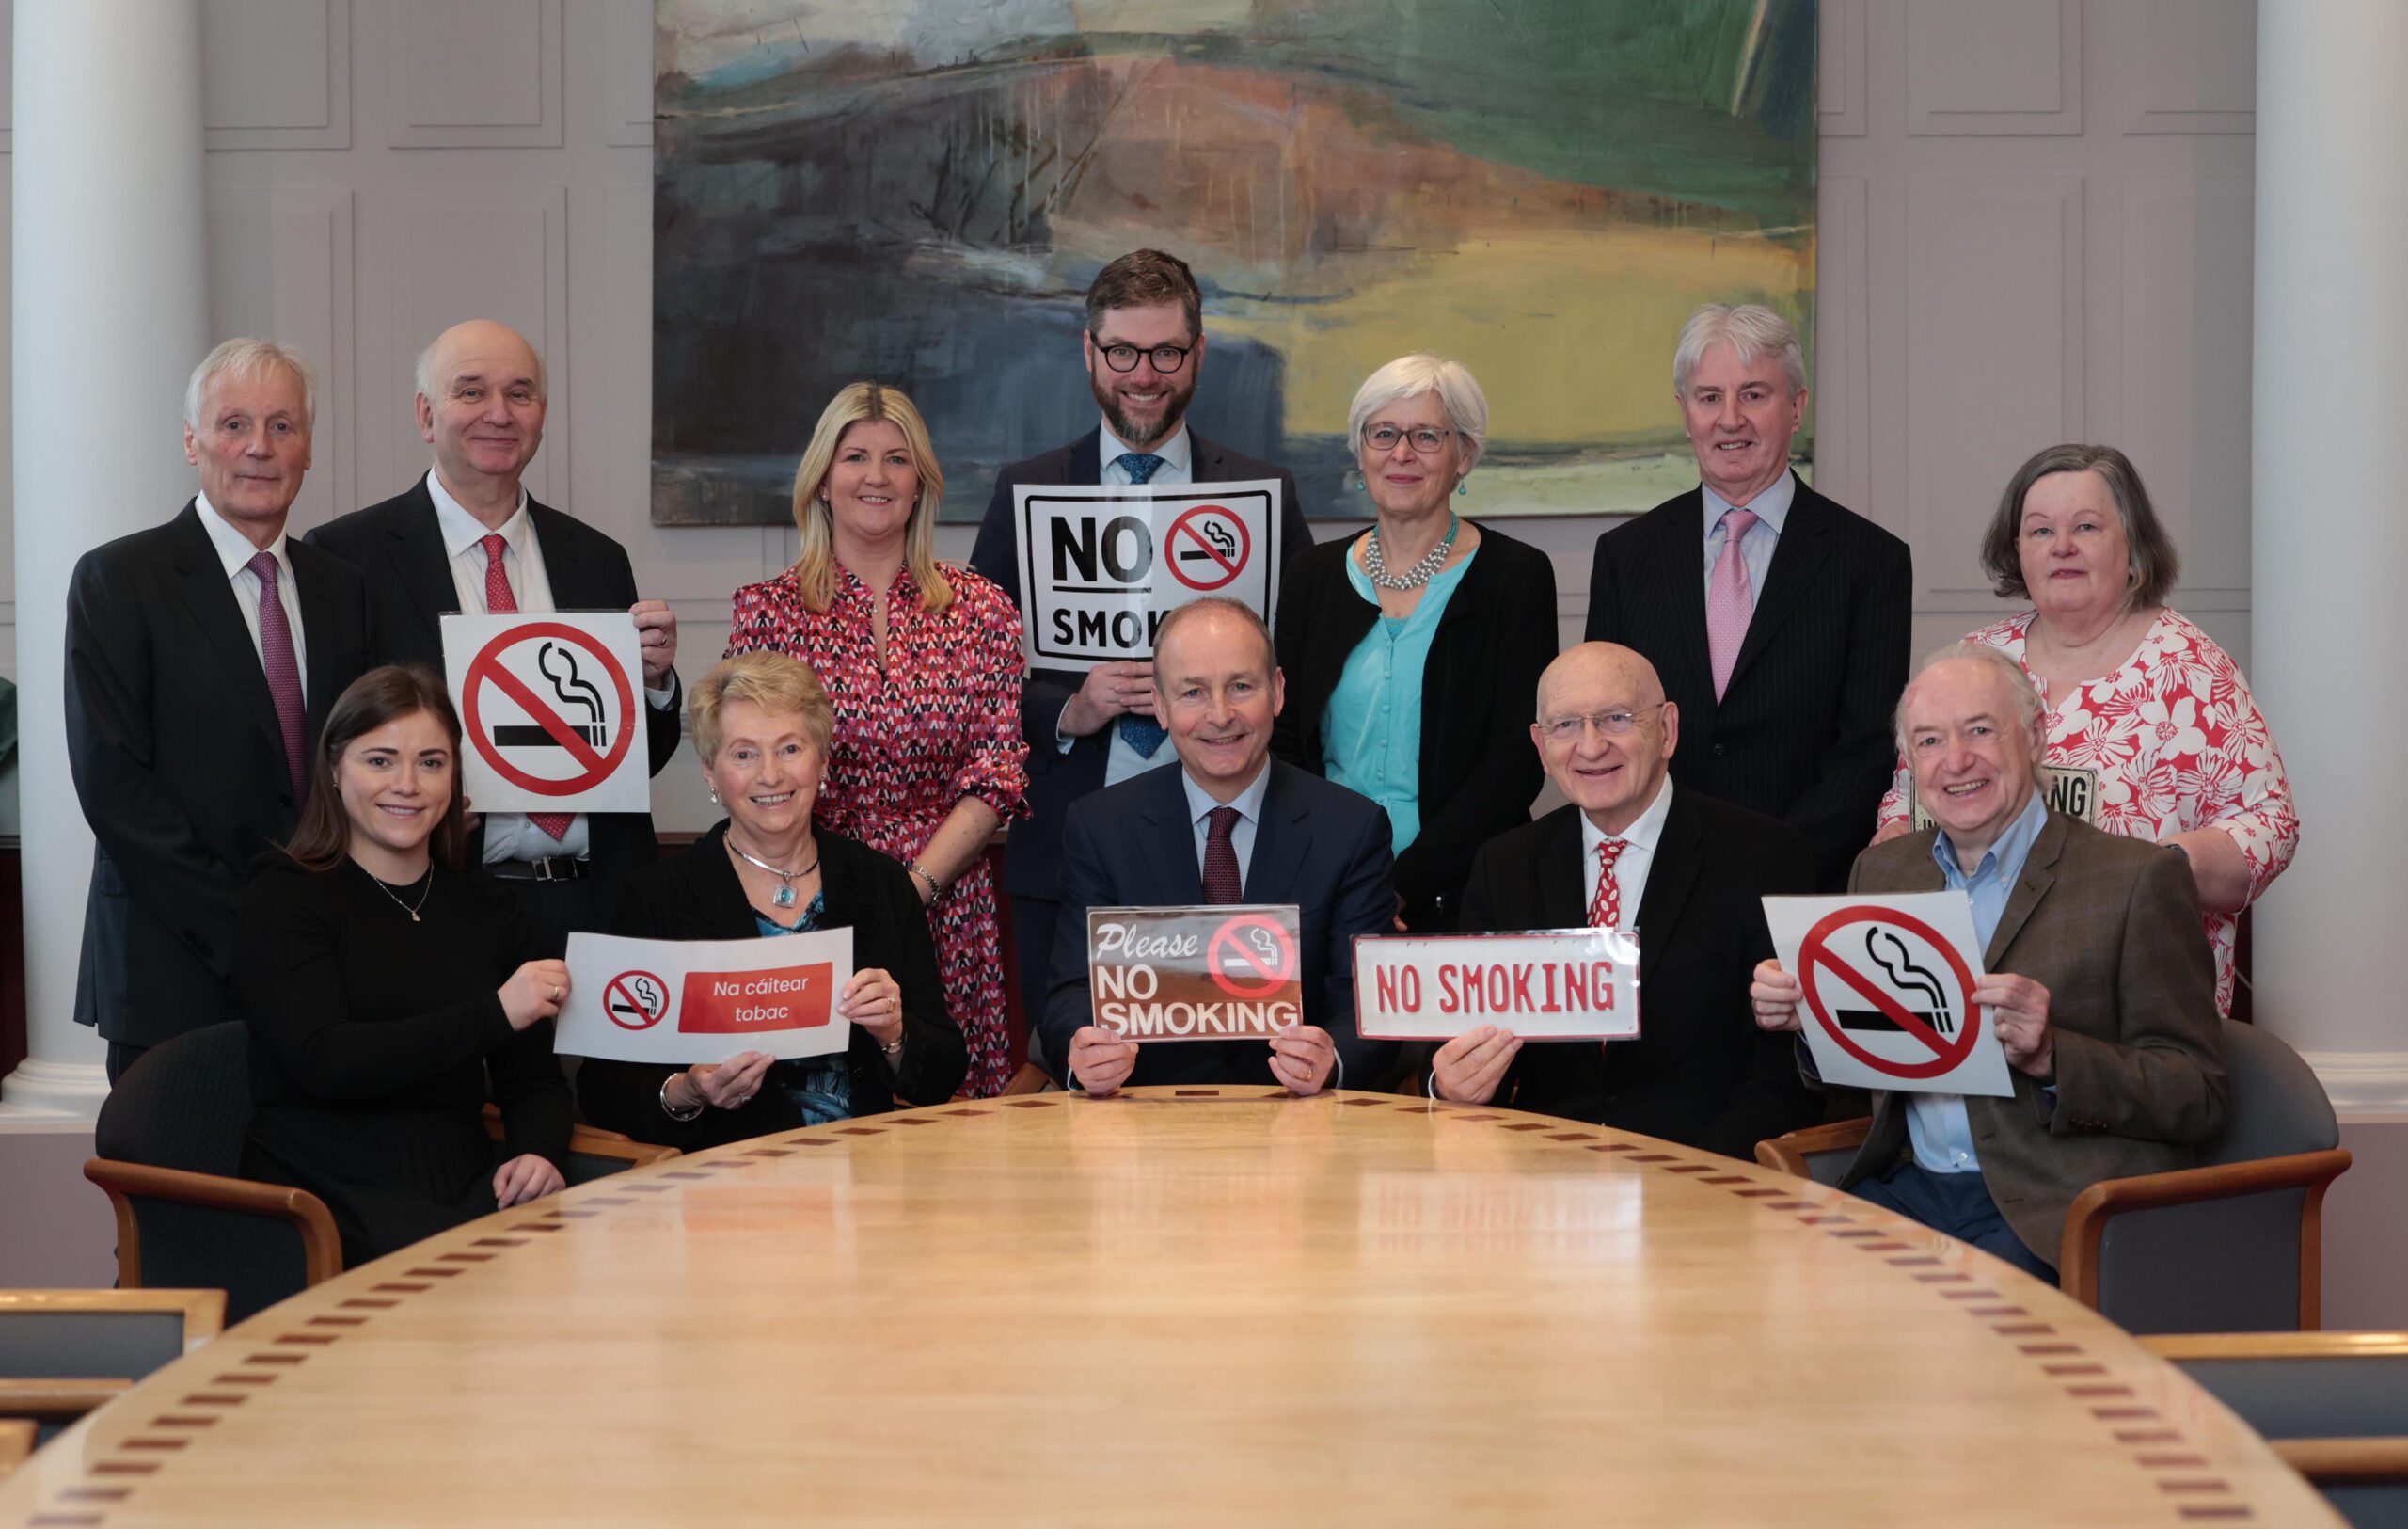 WORKPLACE SMOKING BAN SAVES OVER 3,700 LIVES IN FIRST FOUR YEARS